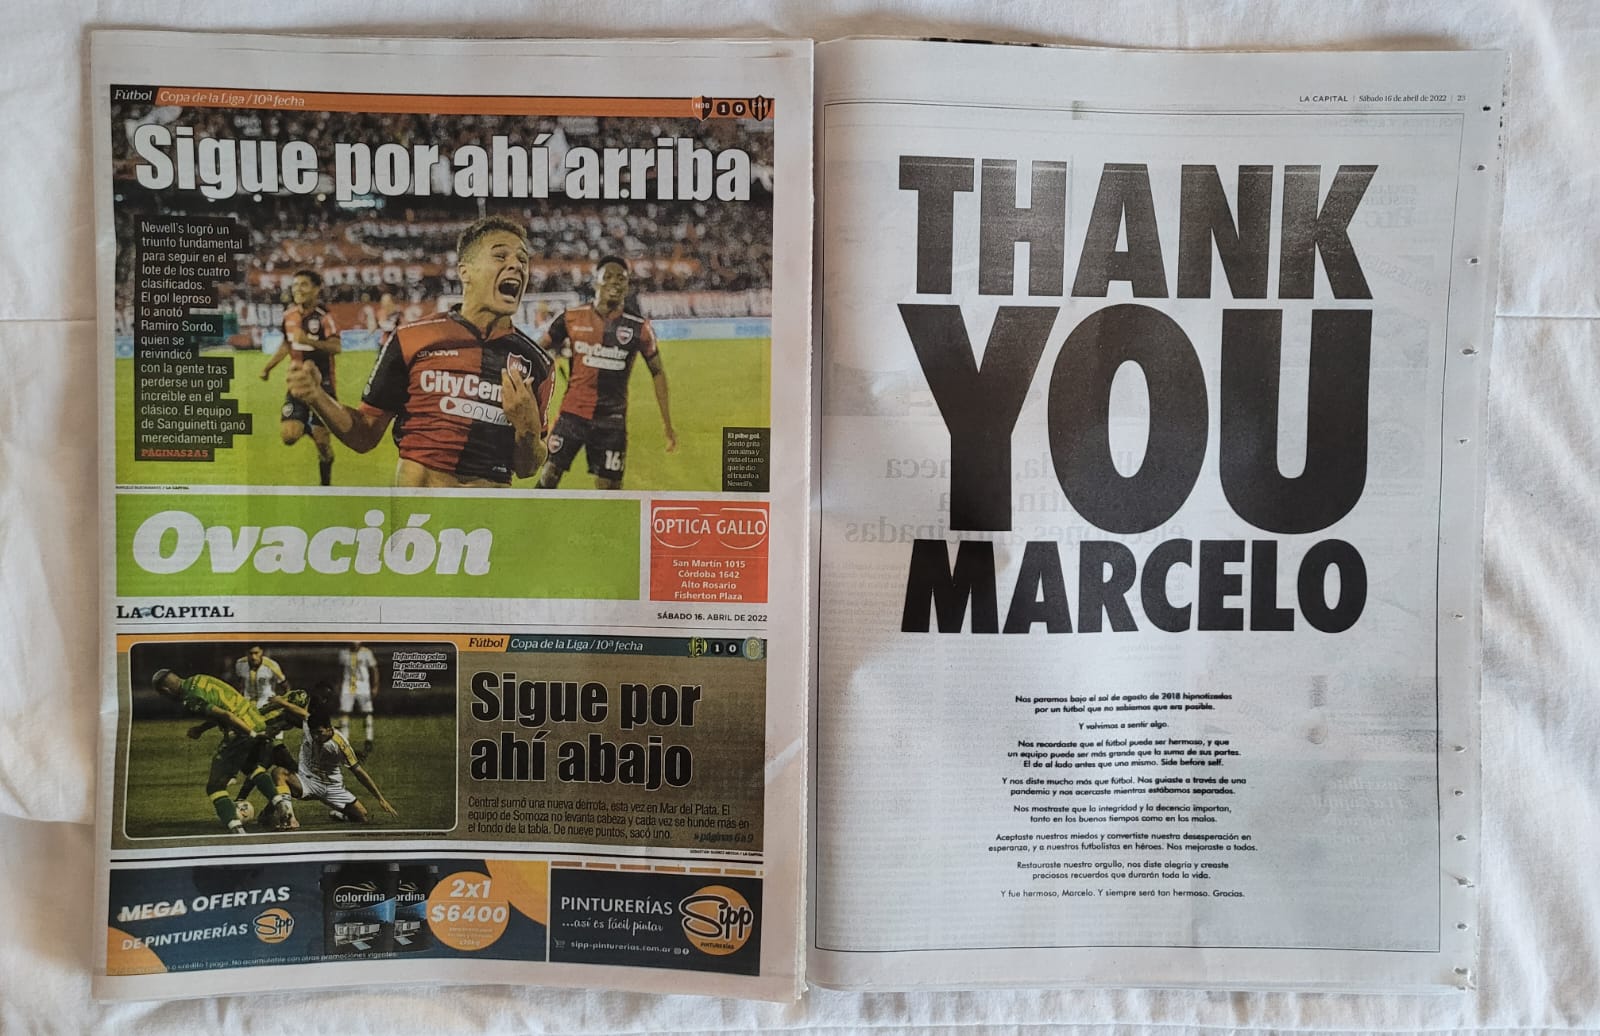 Leeds fans pay tribute to Marcelo Bielsa with full-page ad in Argentinian newspaper La Capital